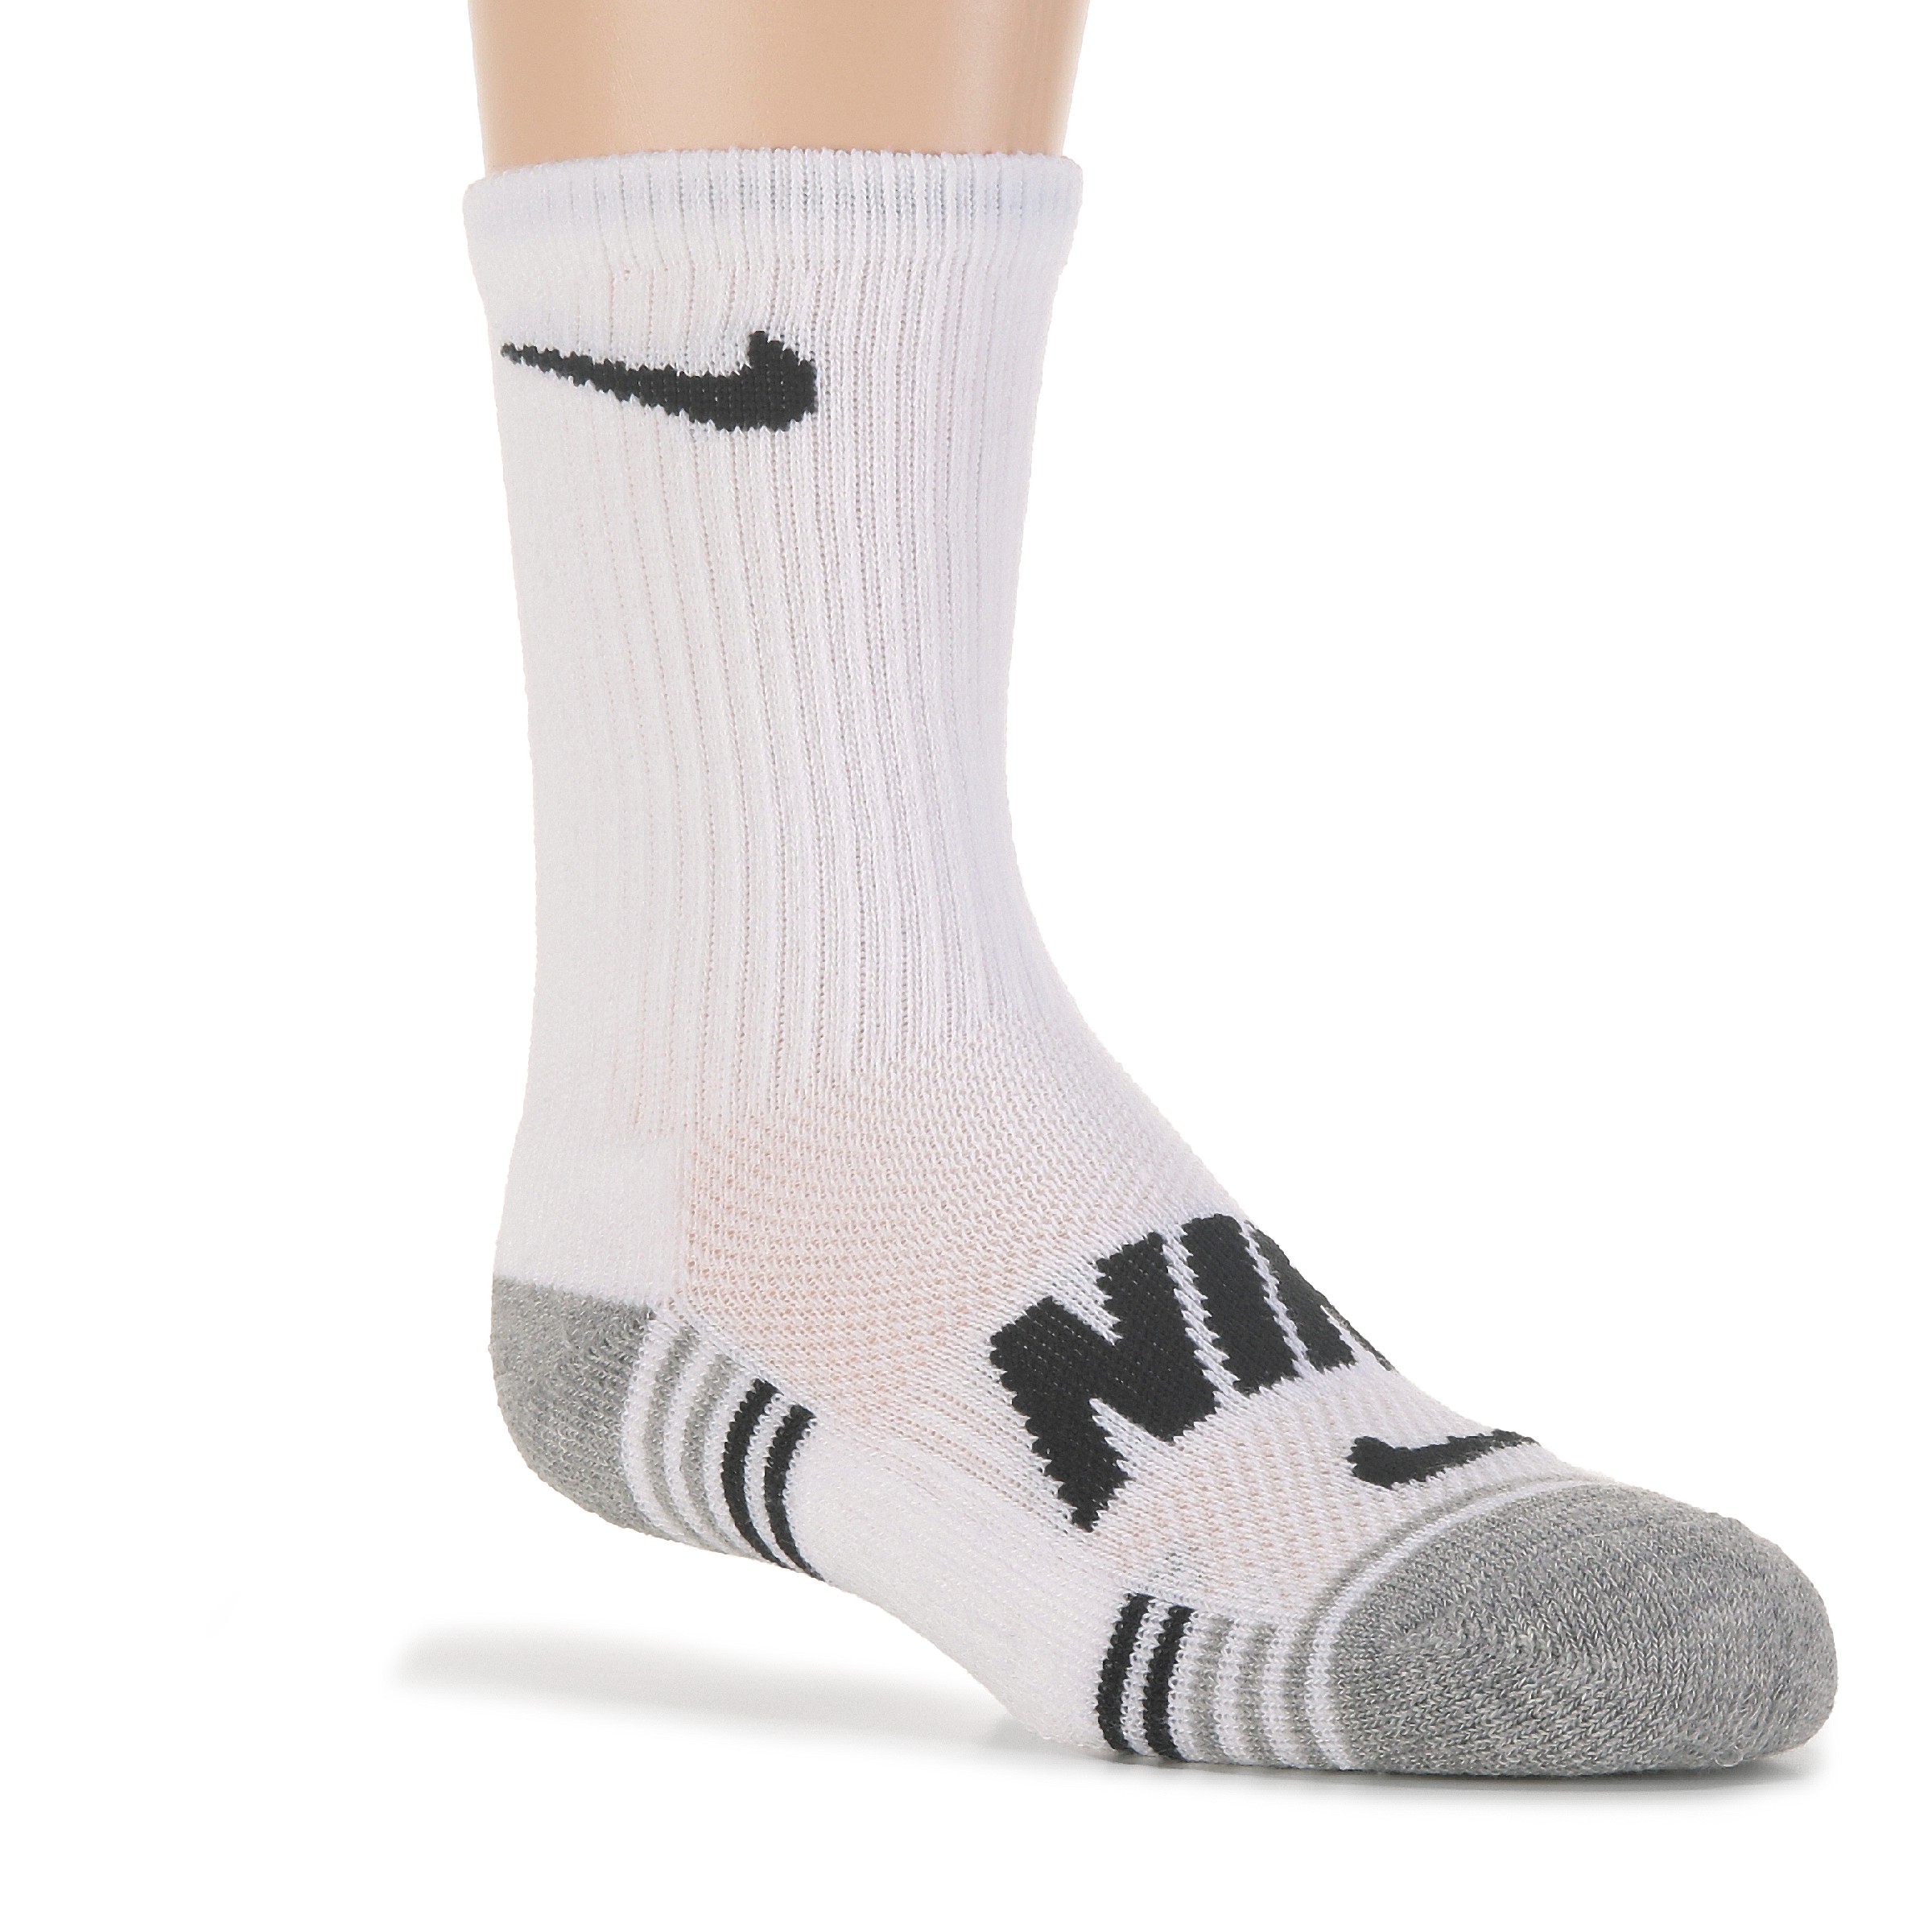 Kids' 6 Pack Youth X-Small Ankle Socks